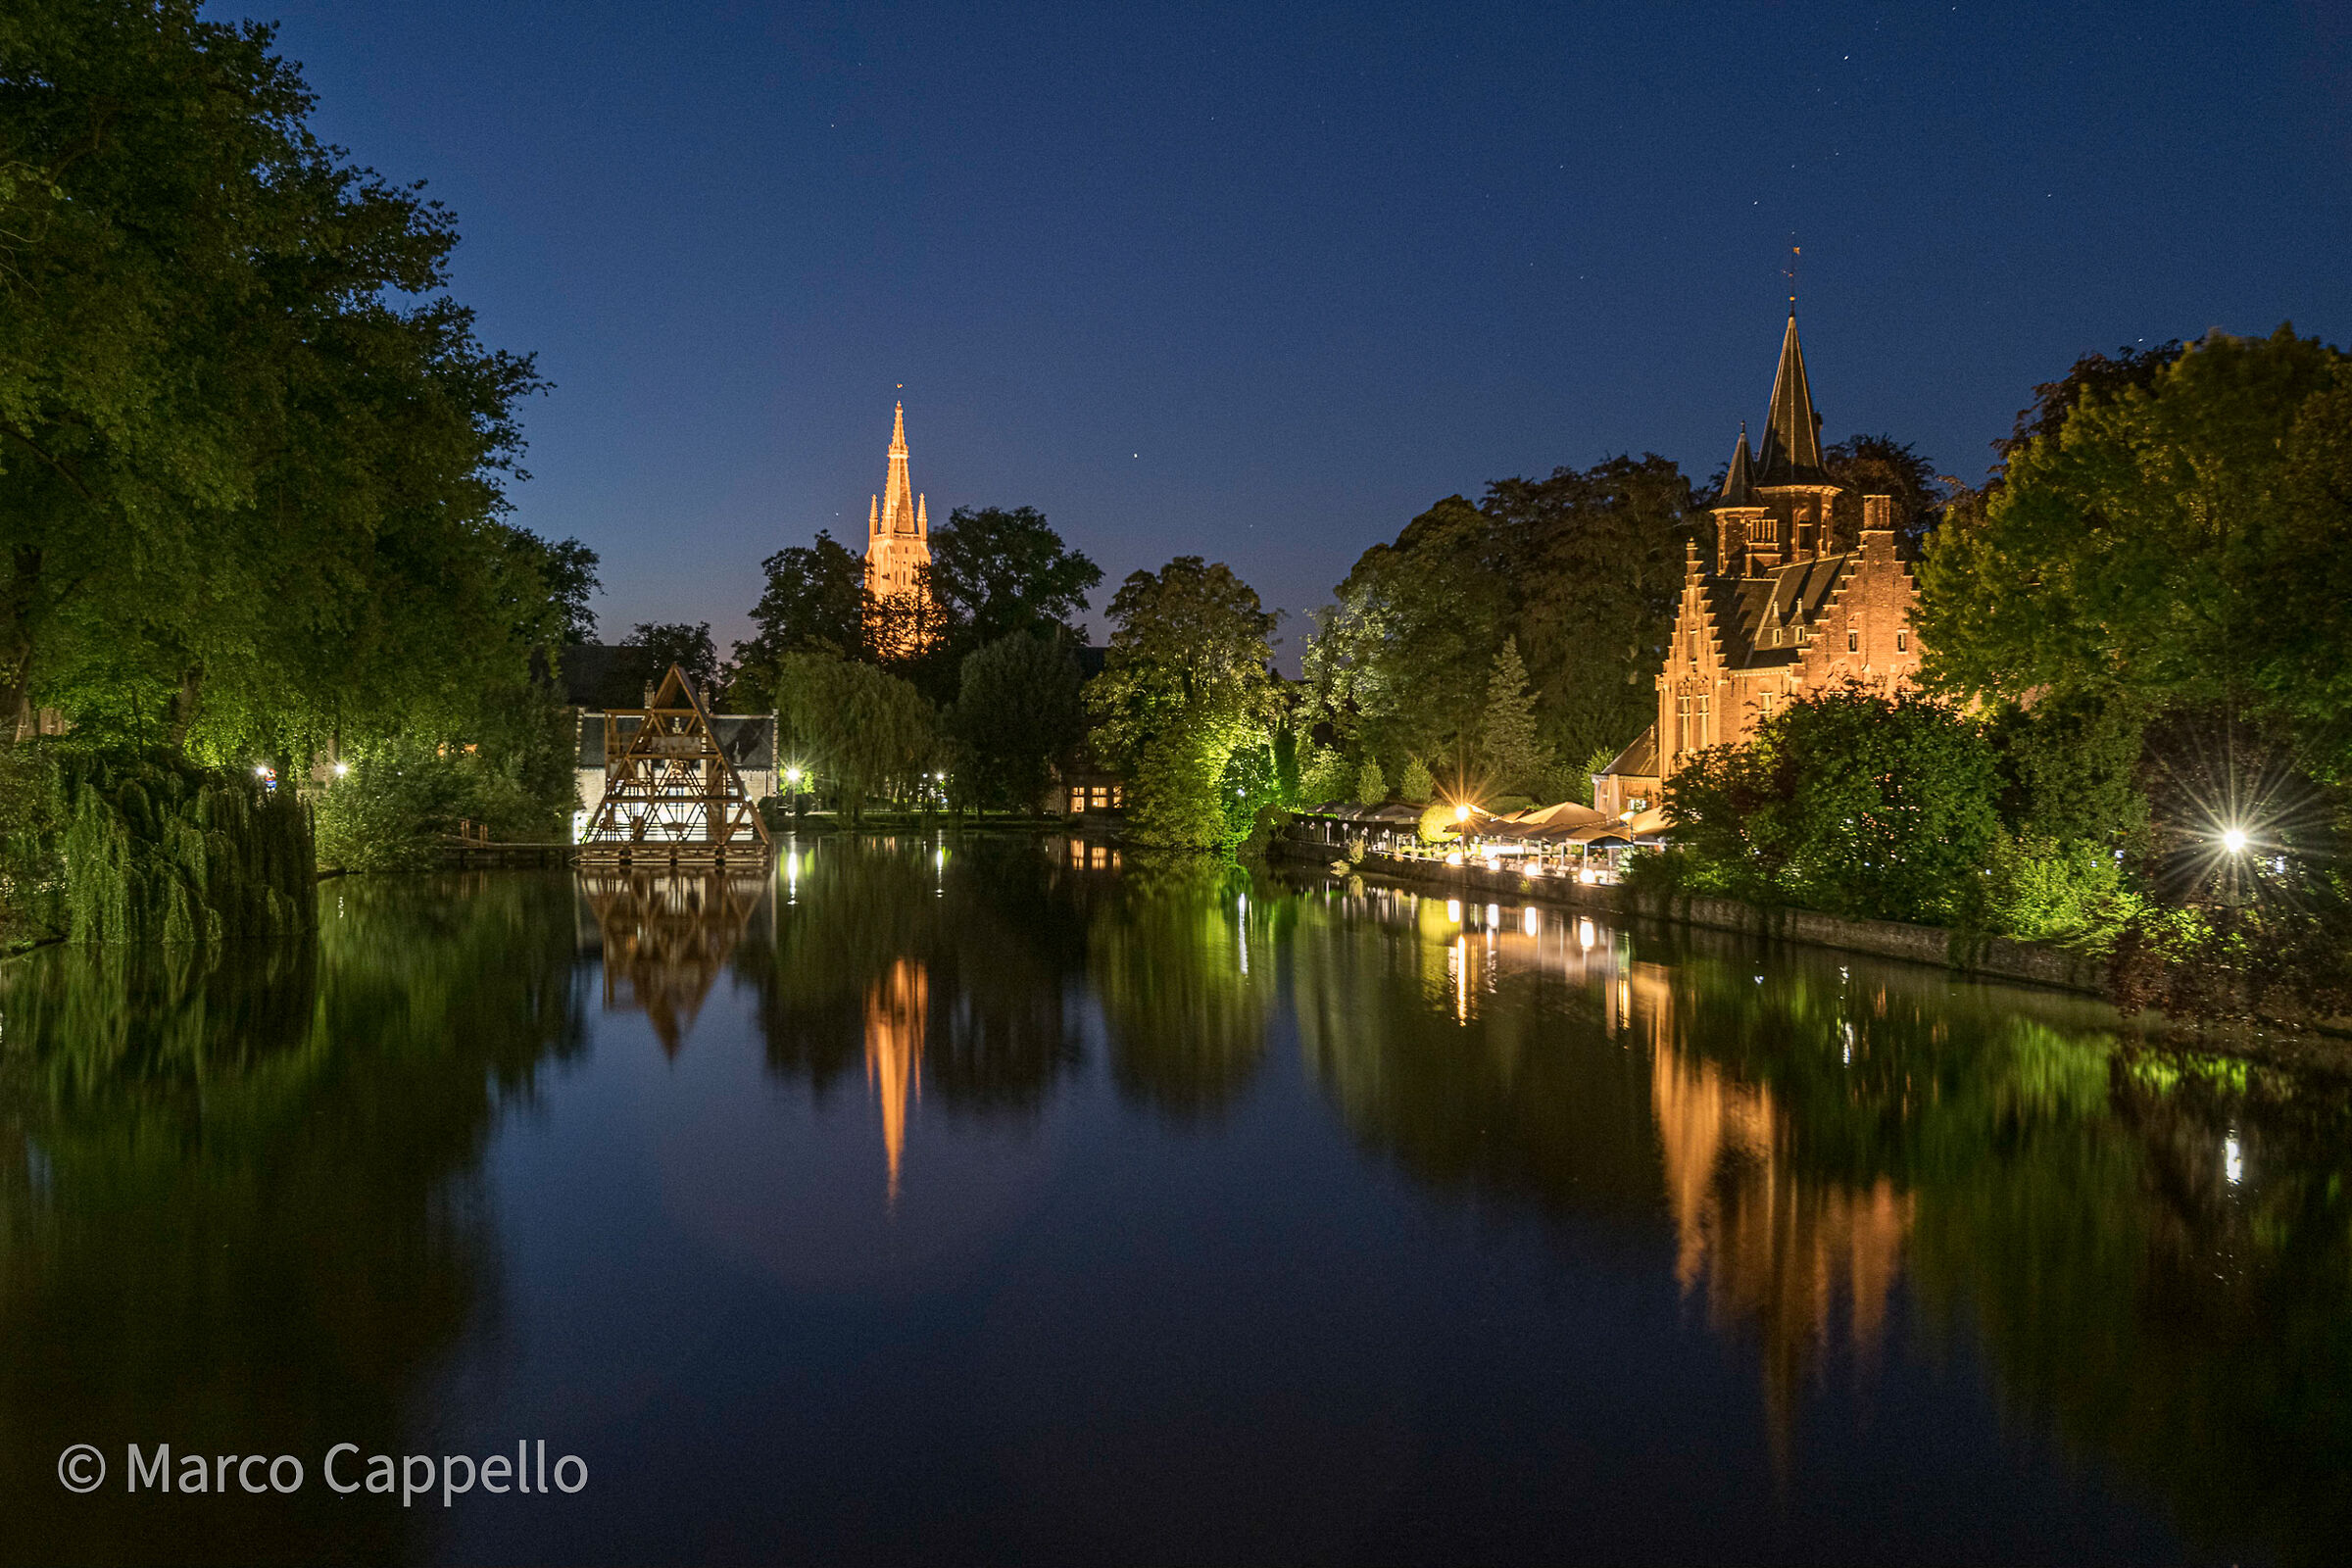 Bruges by night...